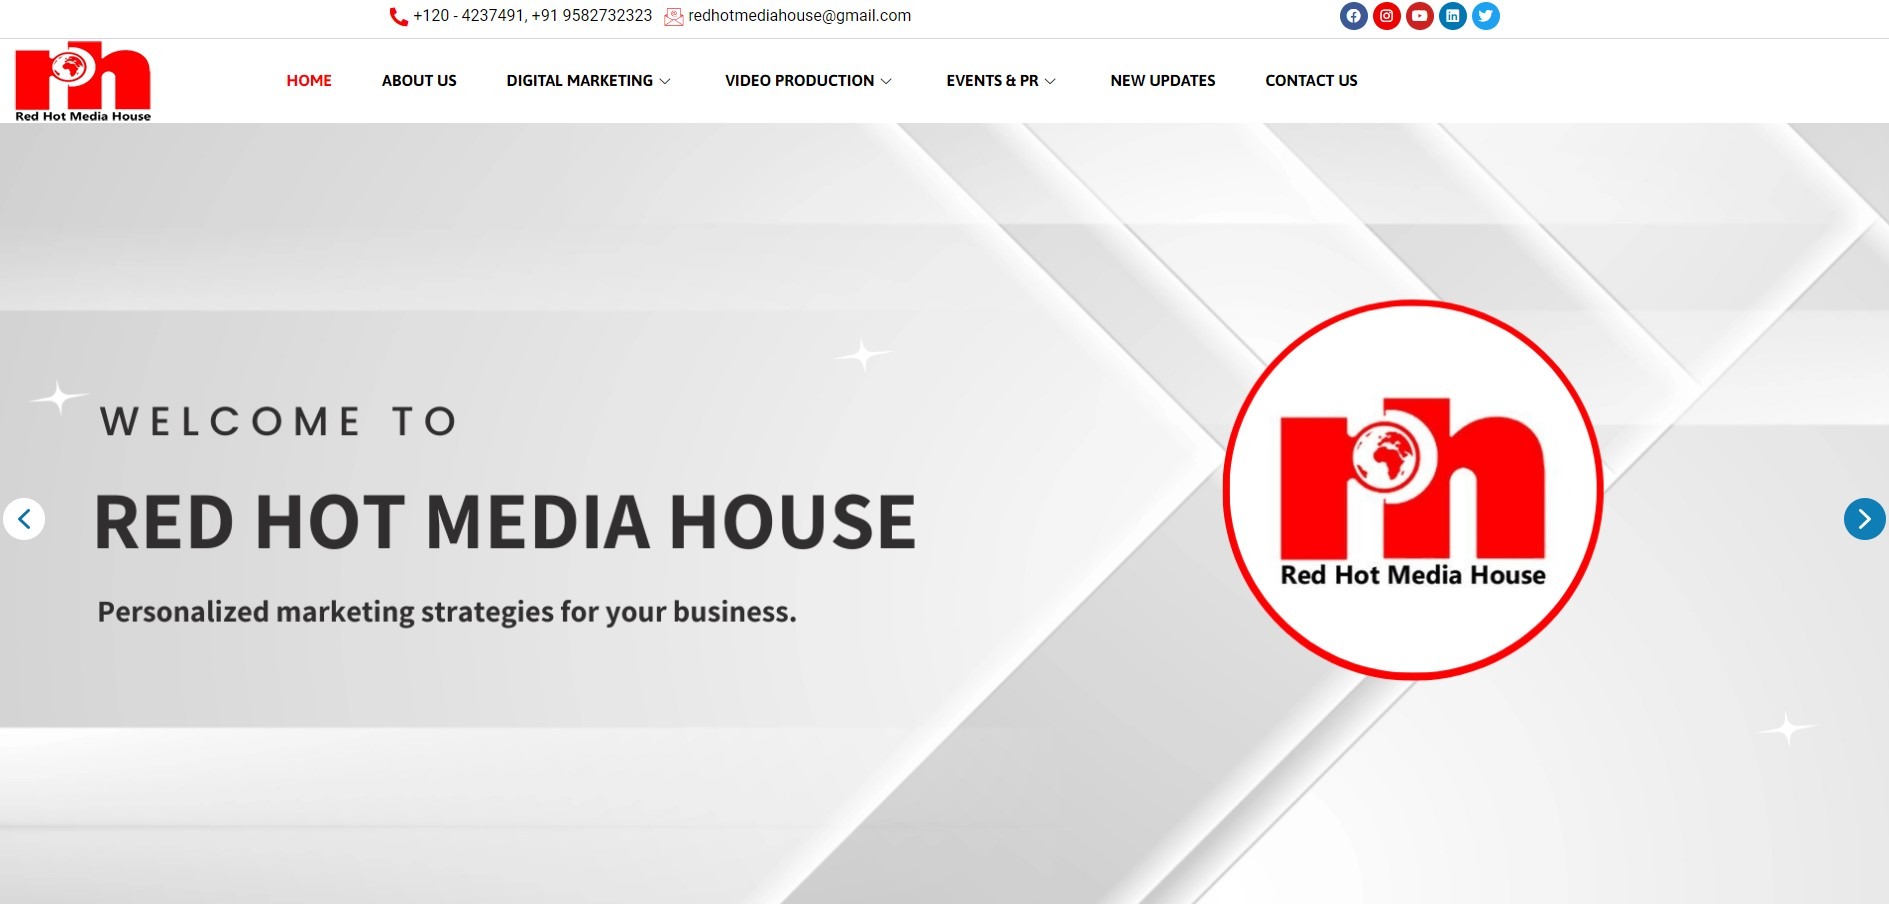 Red Hot Media House